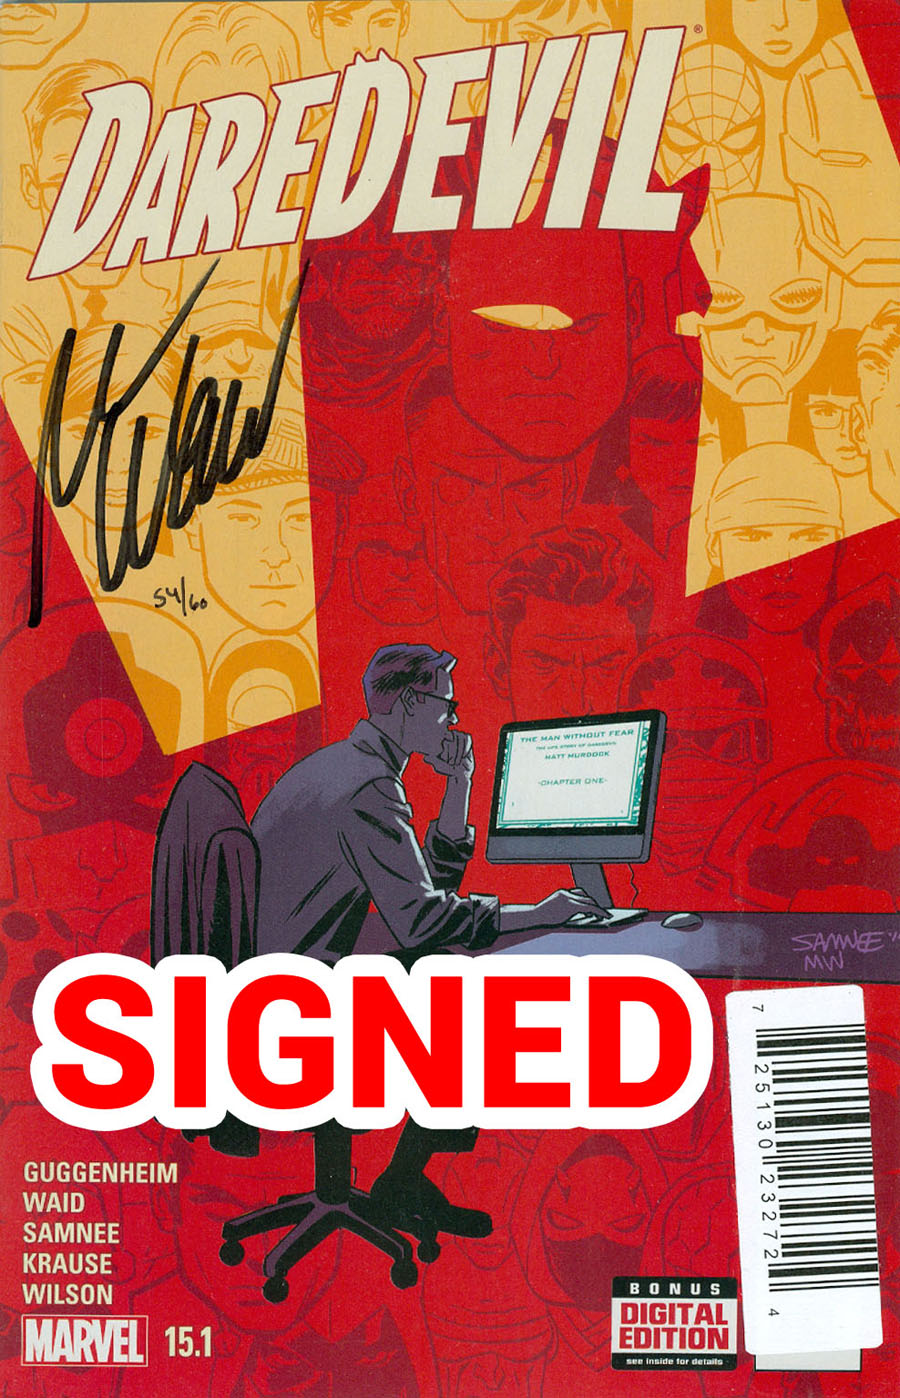 Daredevil Vol 4 #15.1 Cover C DF Signed By Mark Waid